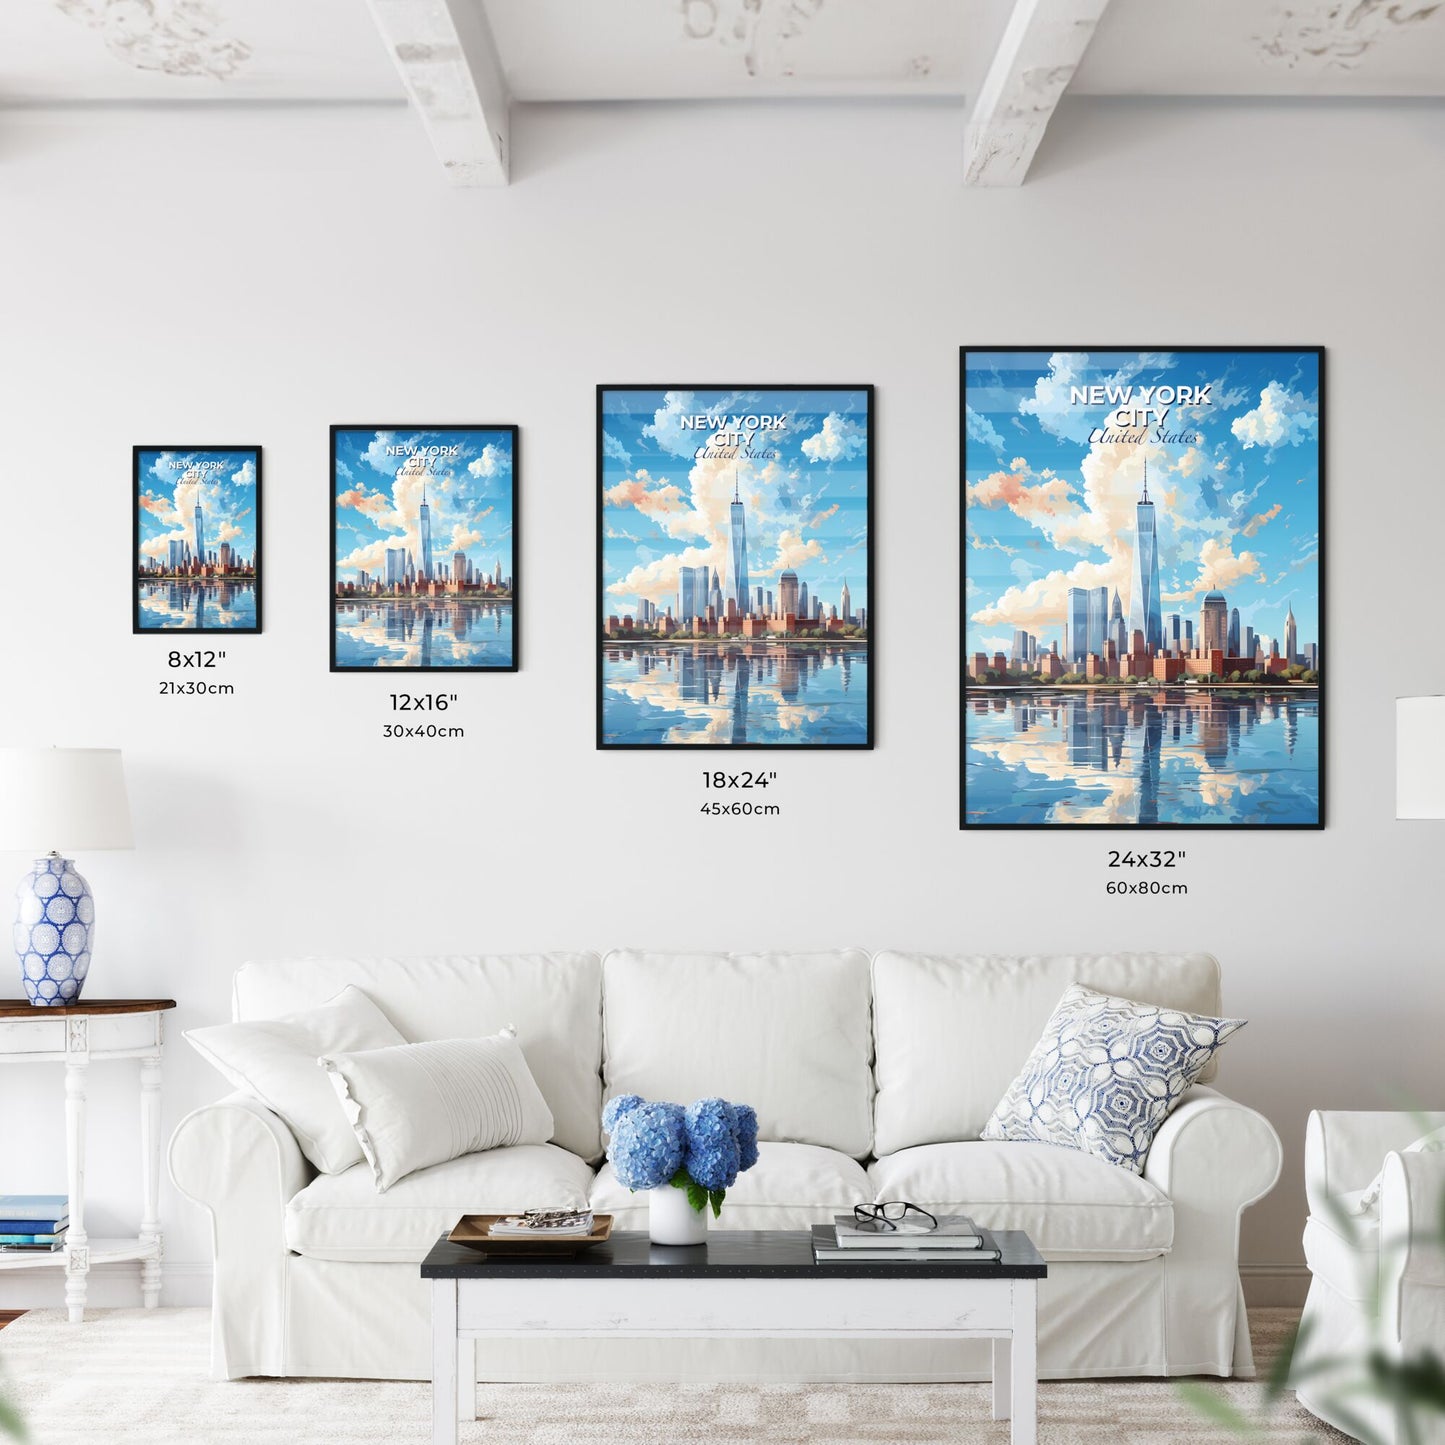 New York City Skyline - A City Skyline With A Body Of Water - Customizable Travel Gift Default Title